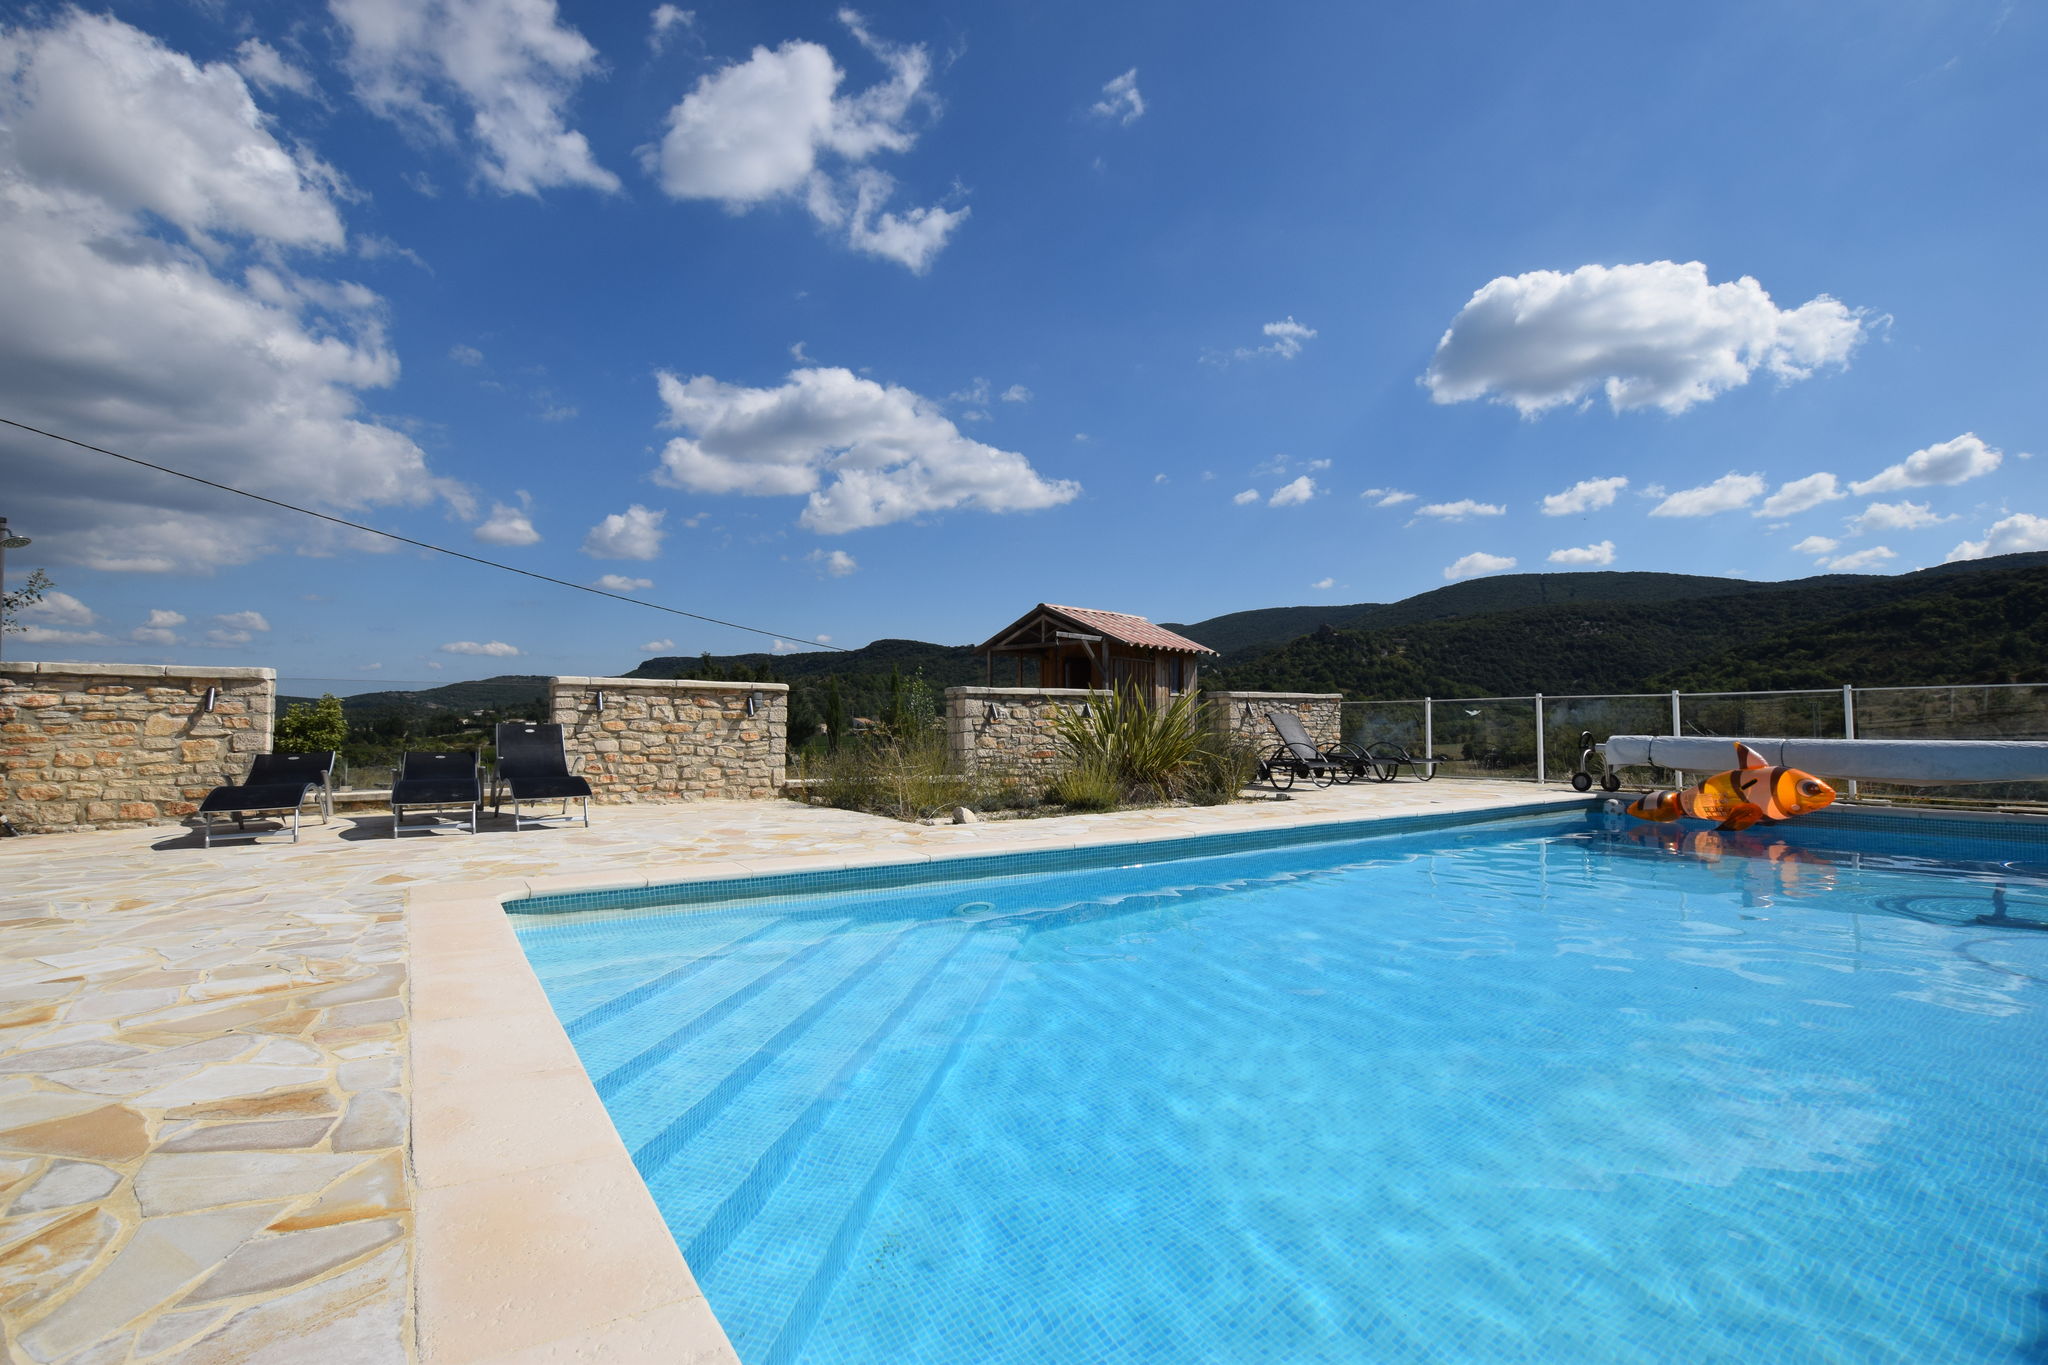 Tasteful holiday home with annexe in a beautiful location with private pool